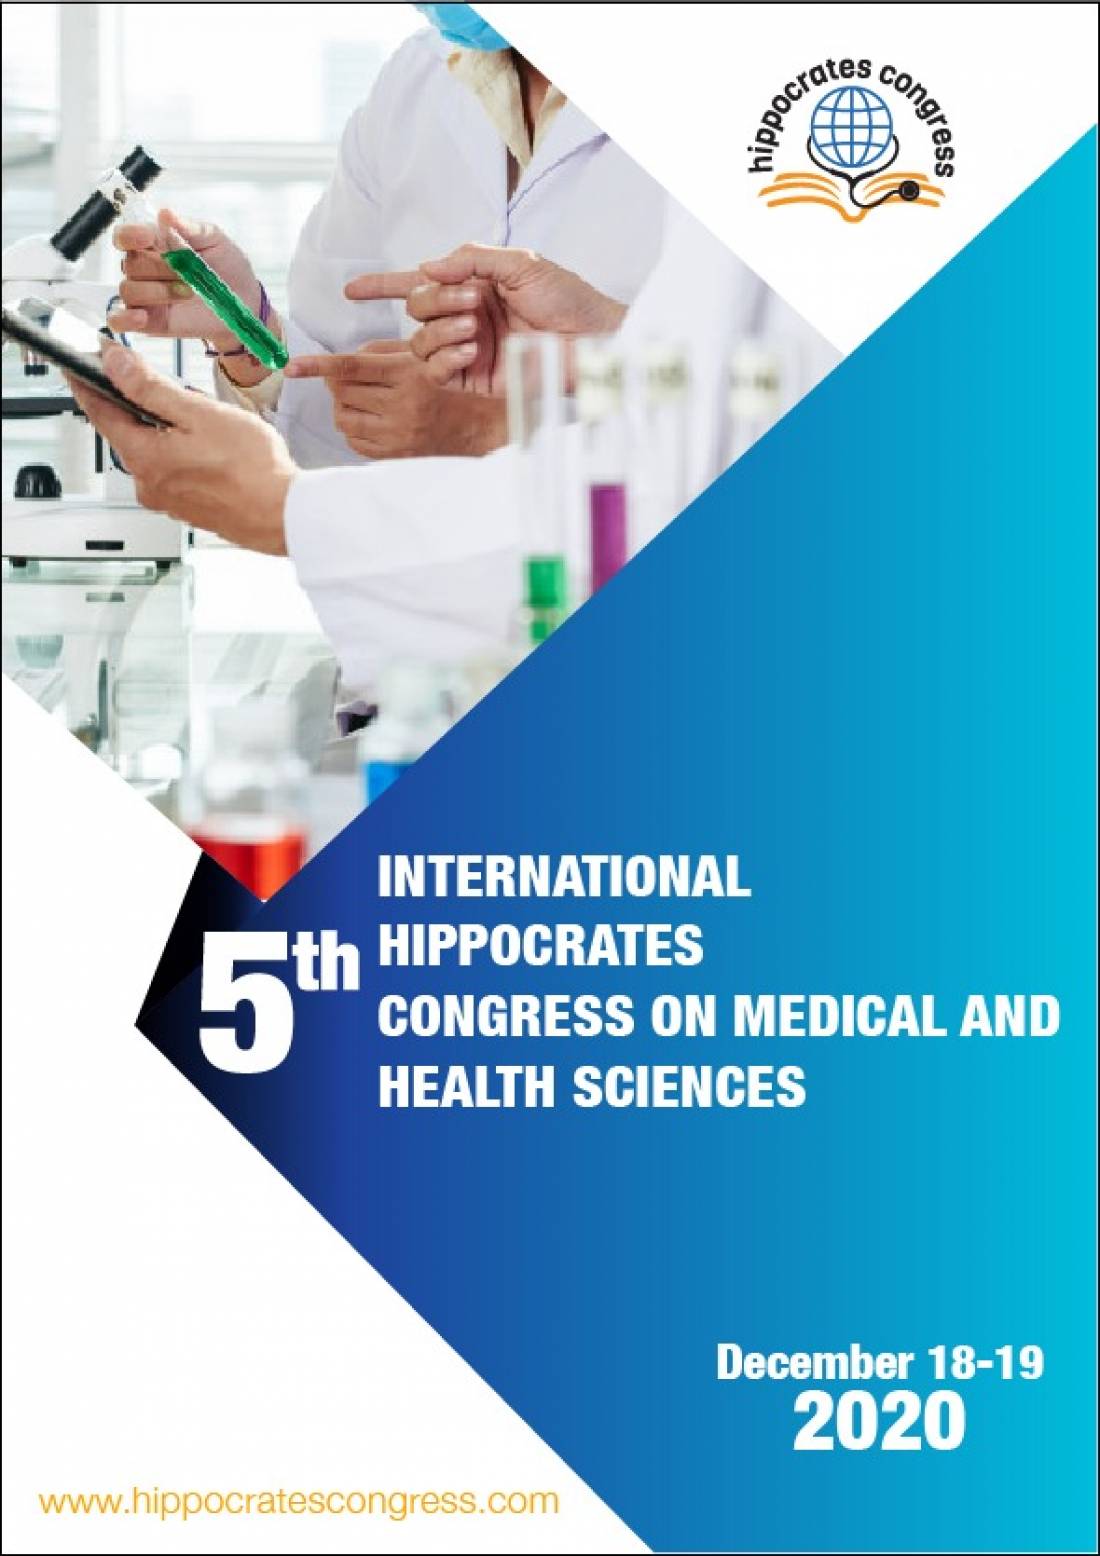 5th International Hippocrates Congress on Medical and Health Sciences